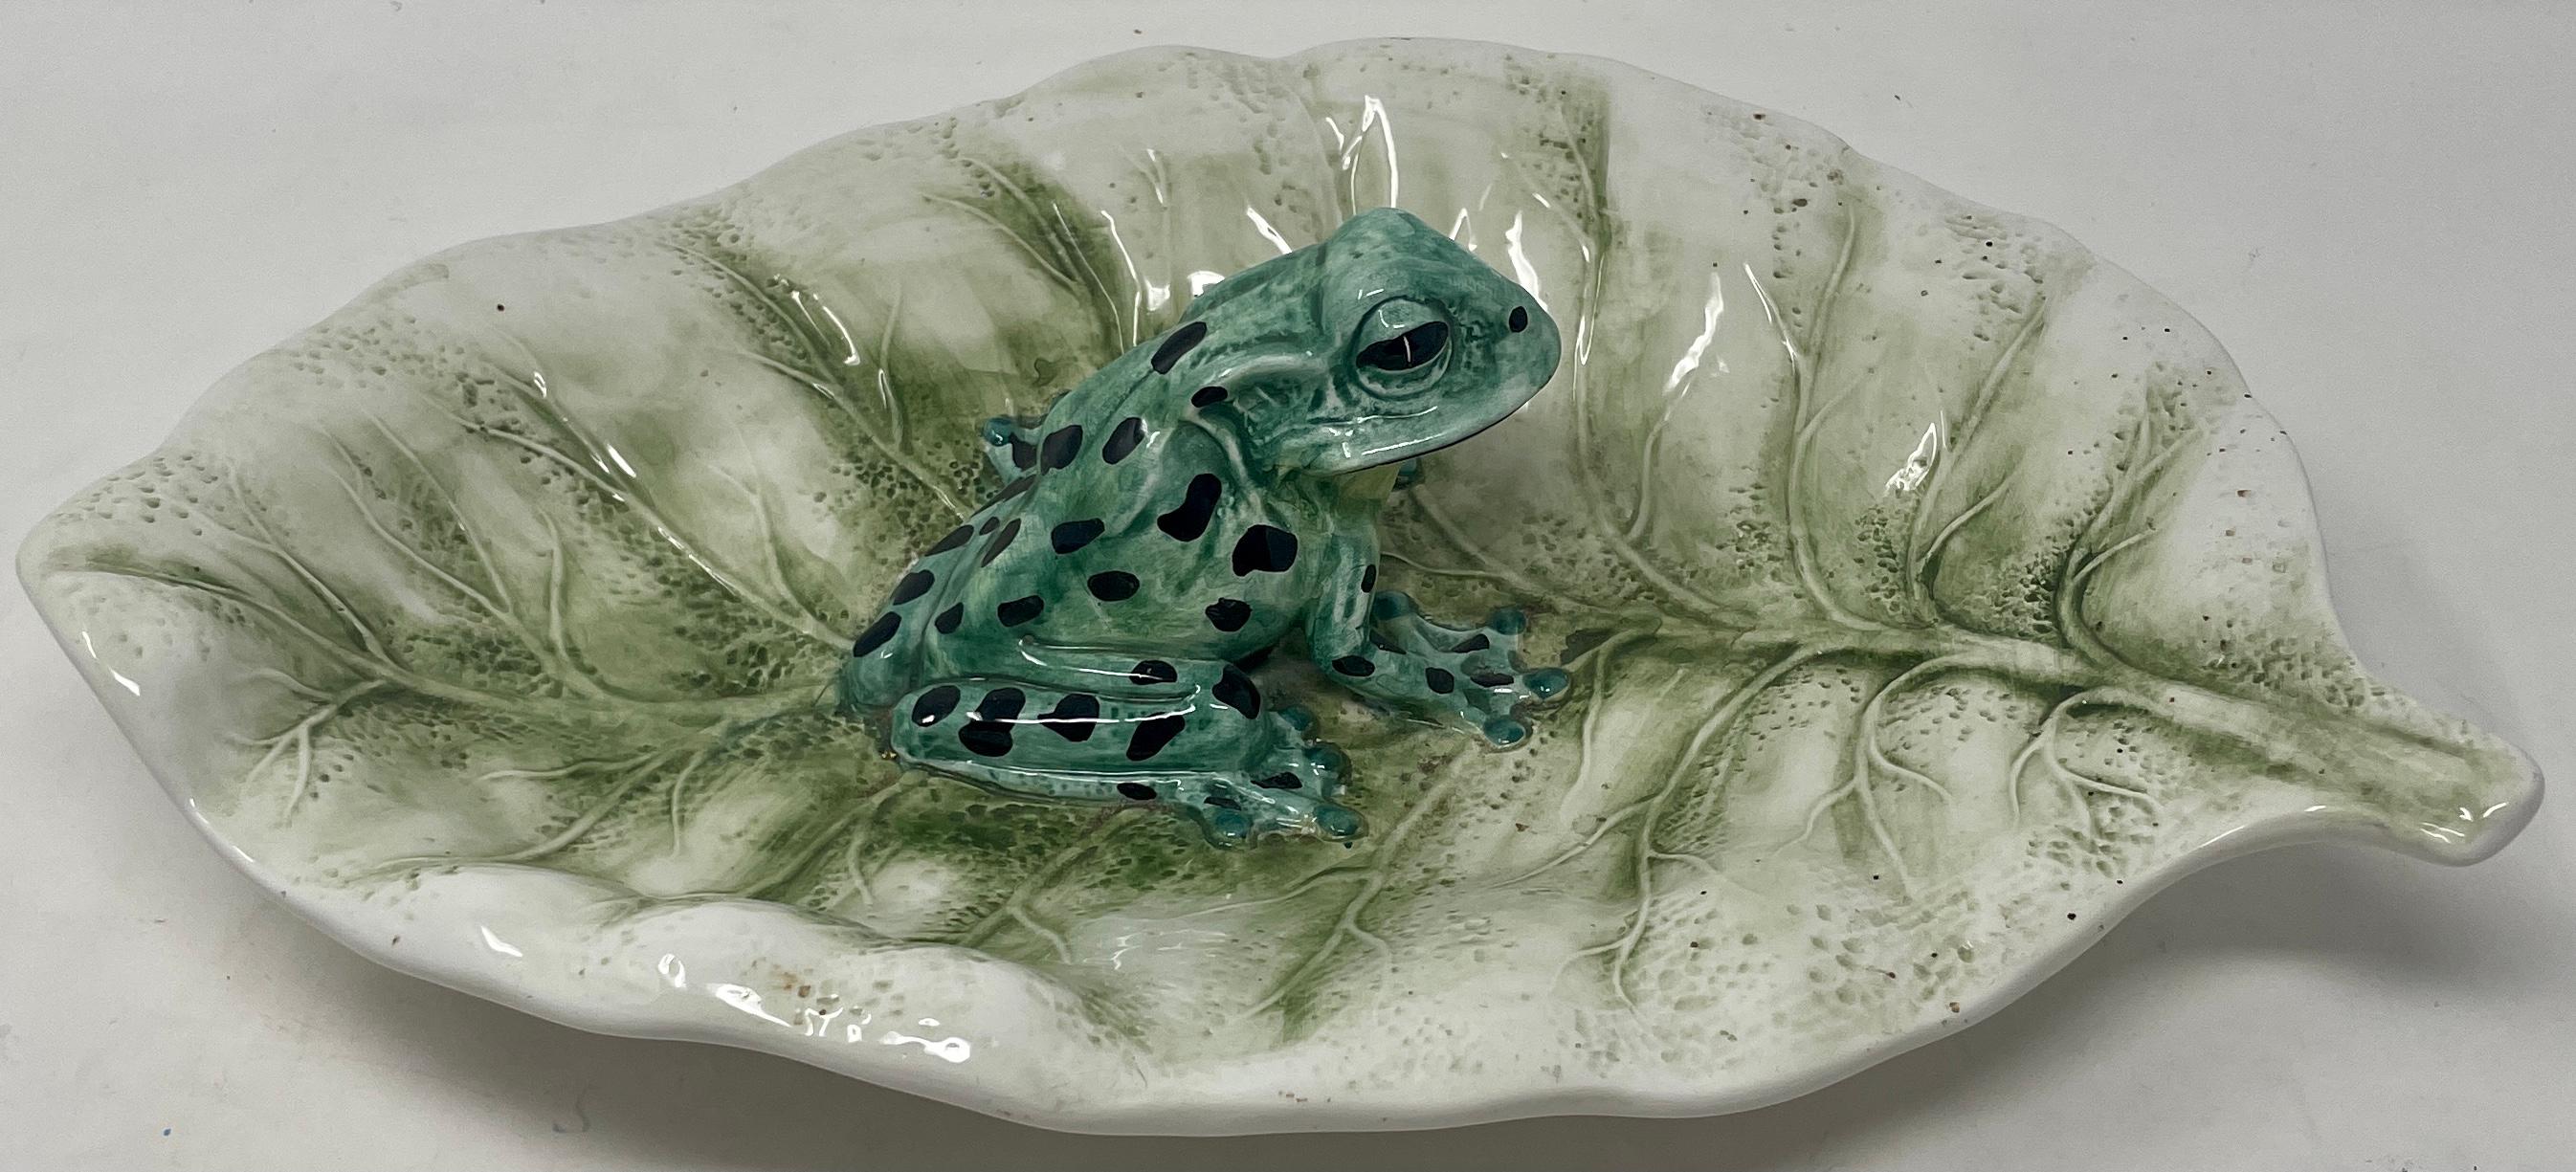 Italian porcelain frog on lily pad.